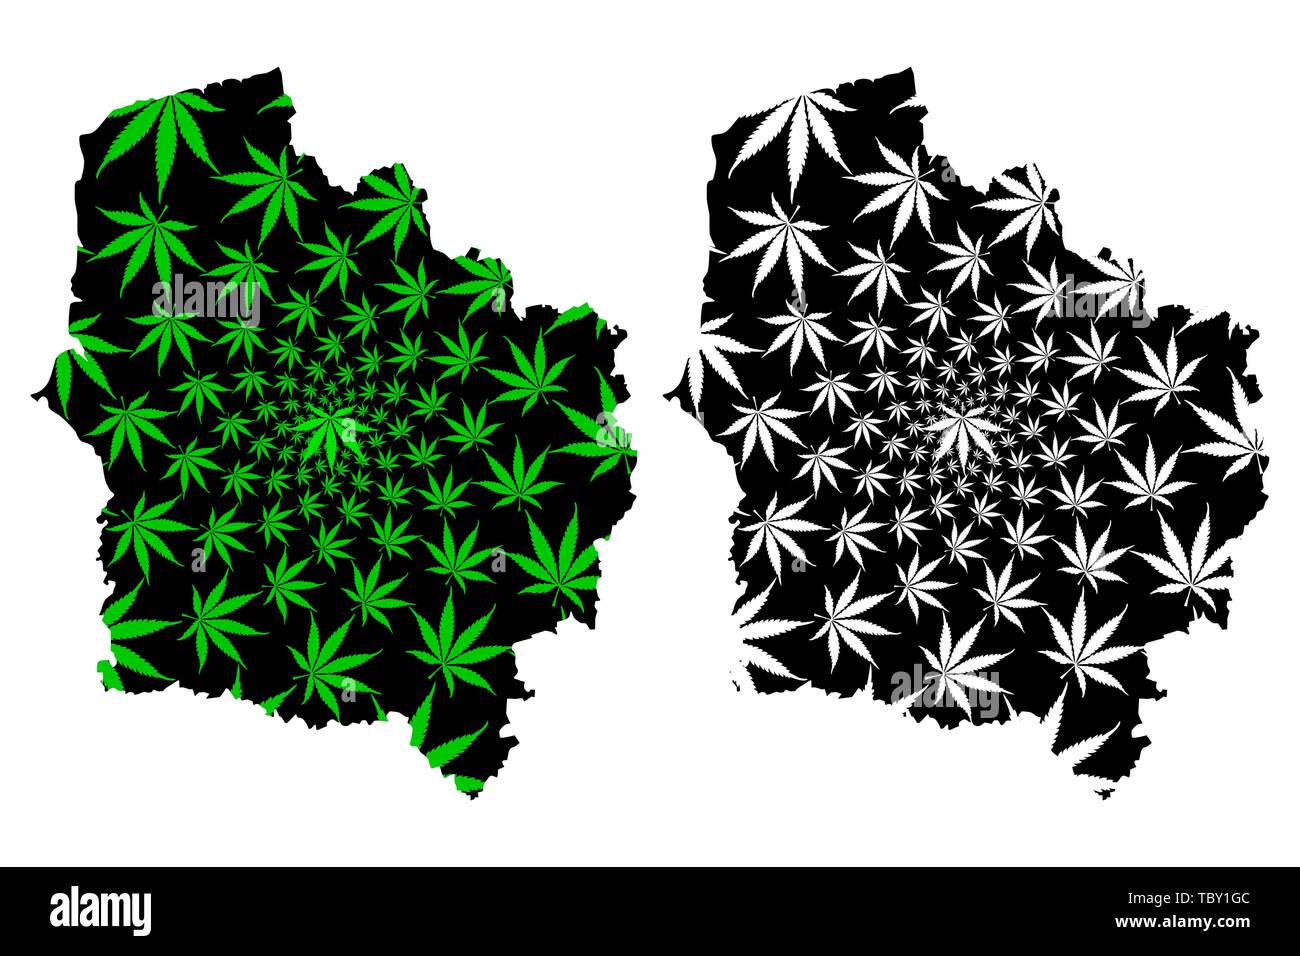 Hauts-de-France (France, administrative region) map is designed cannabis leaf green and black, Nord-Pas-de-Calais and Picardy map made of marijuana (m Stock Vector